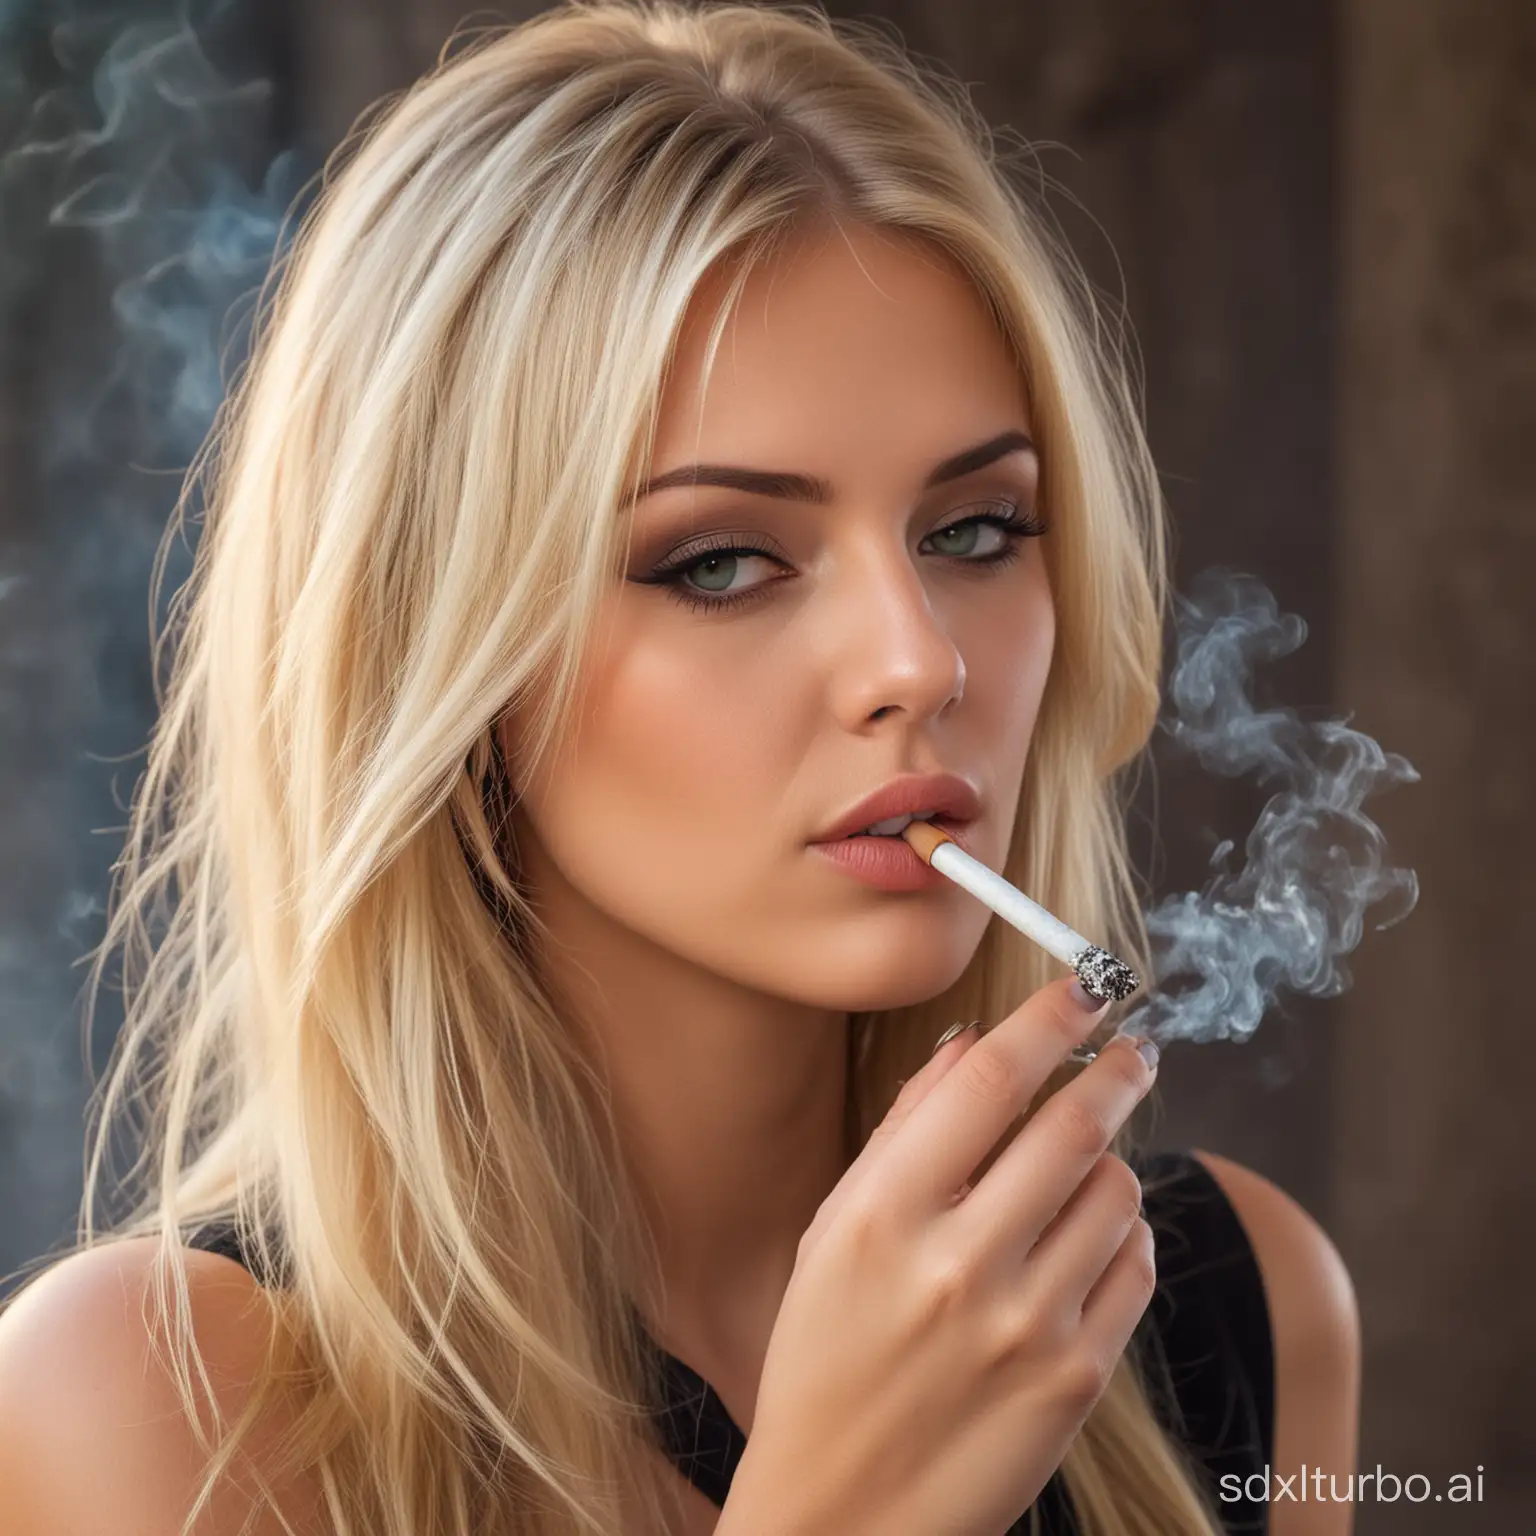 Elegant-Blonde-Woman-Smoking-a-Cigarette-in-a-Fashionable-Setting